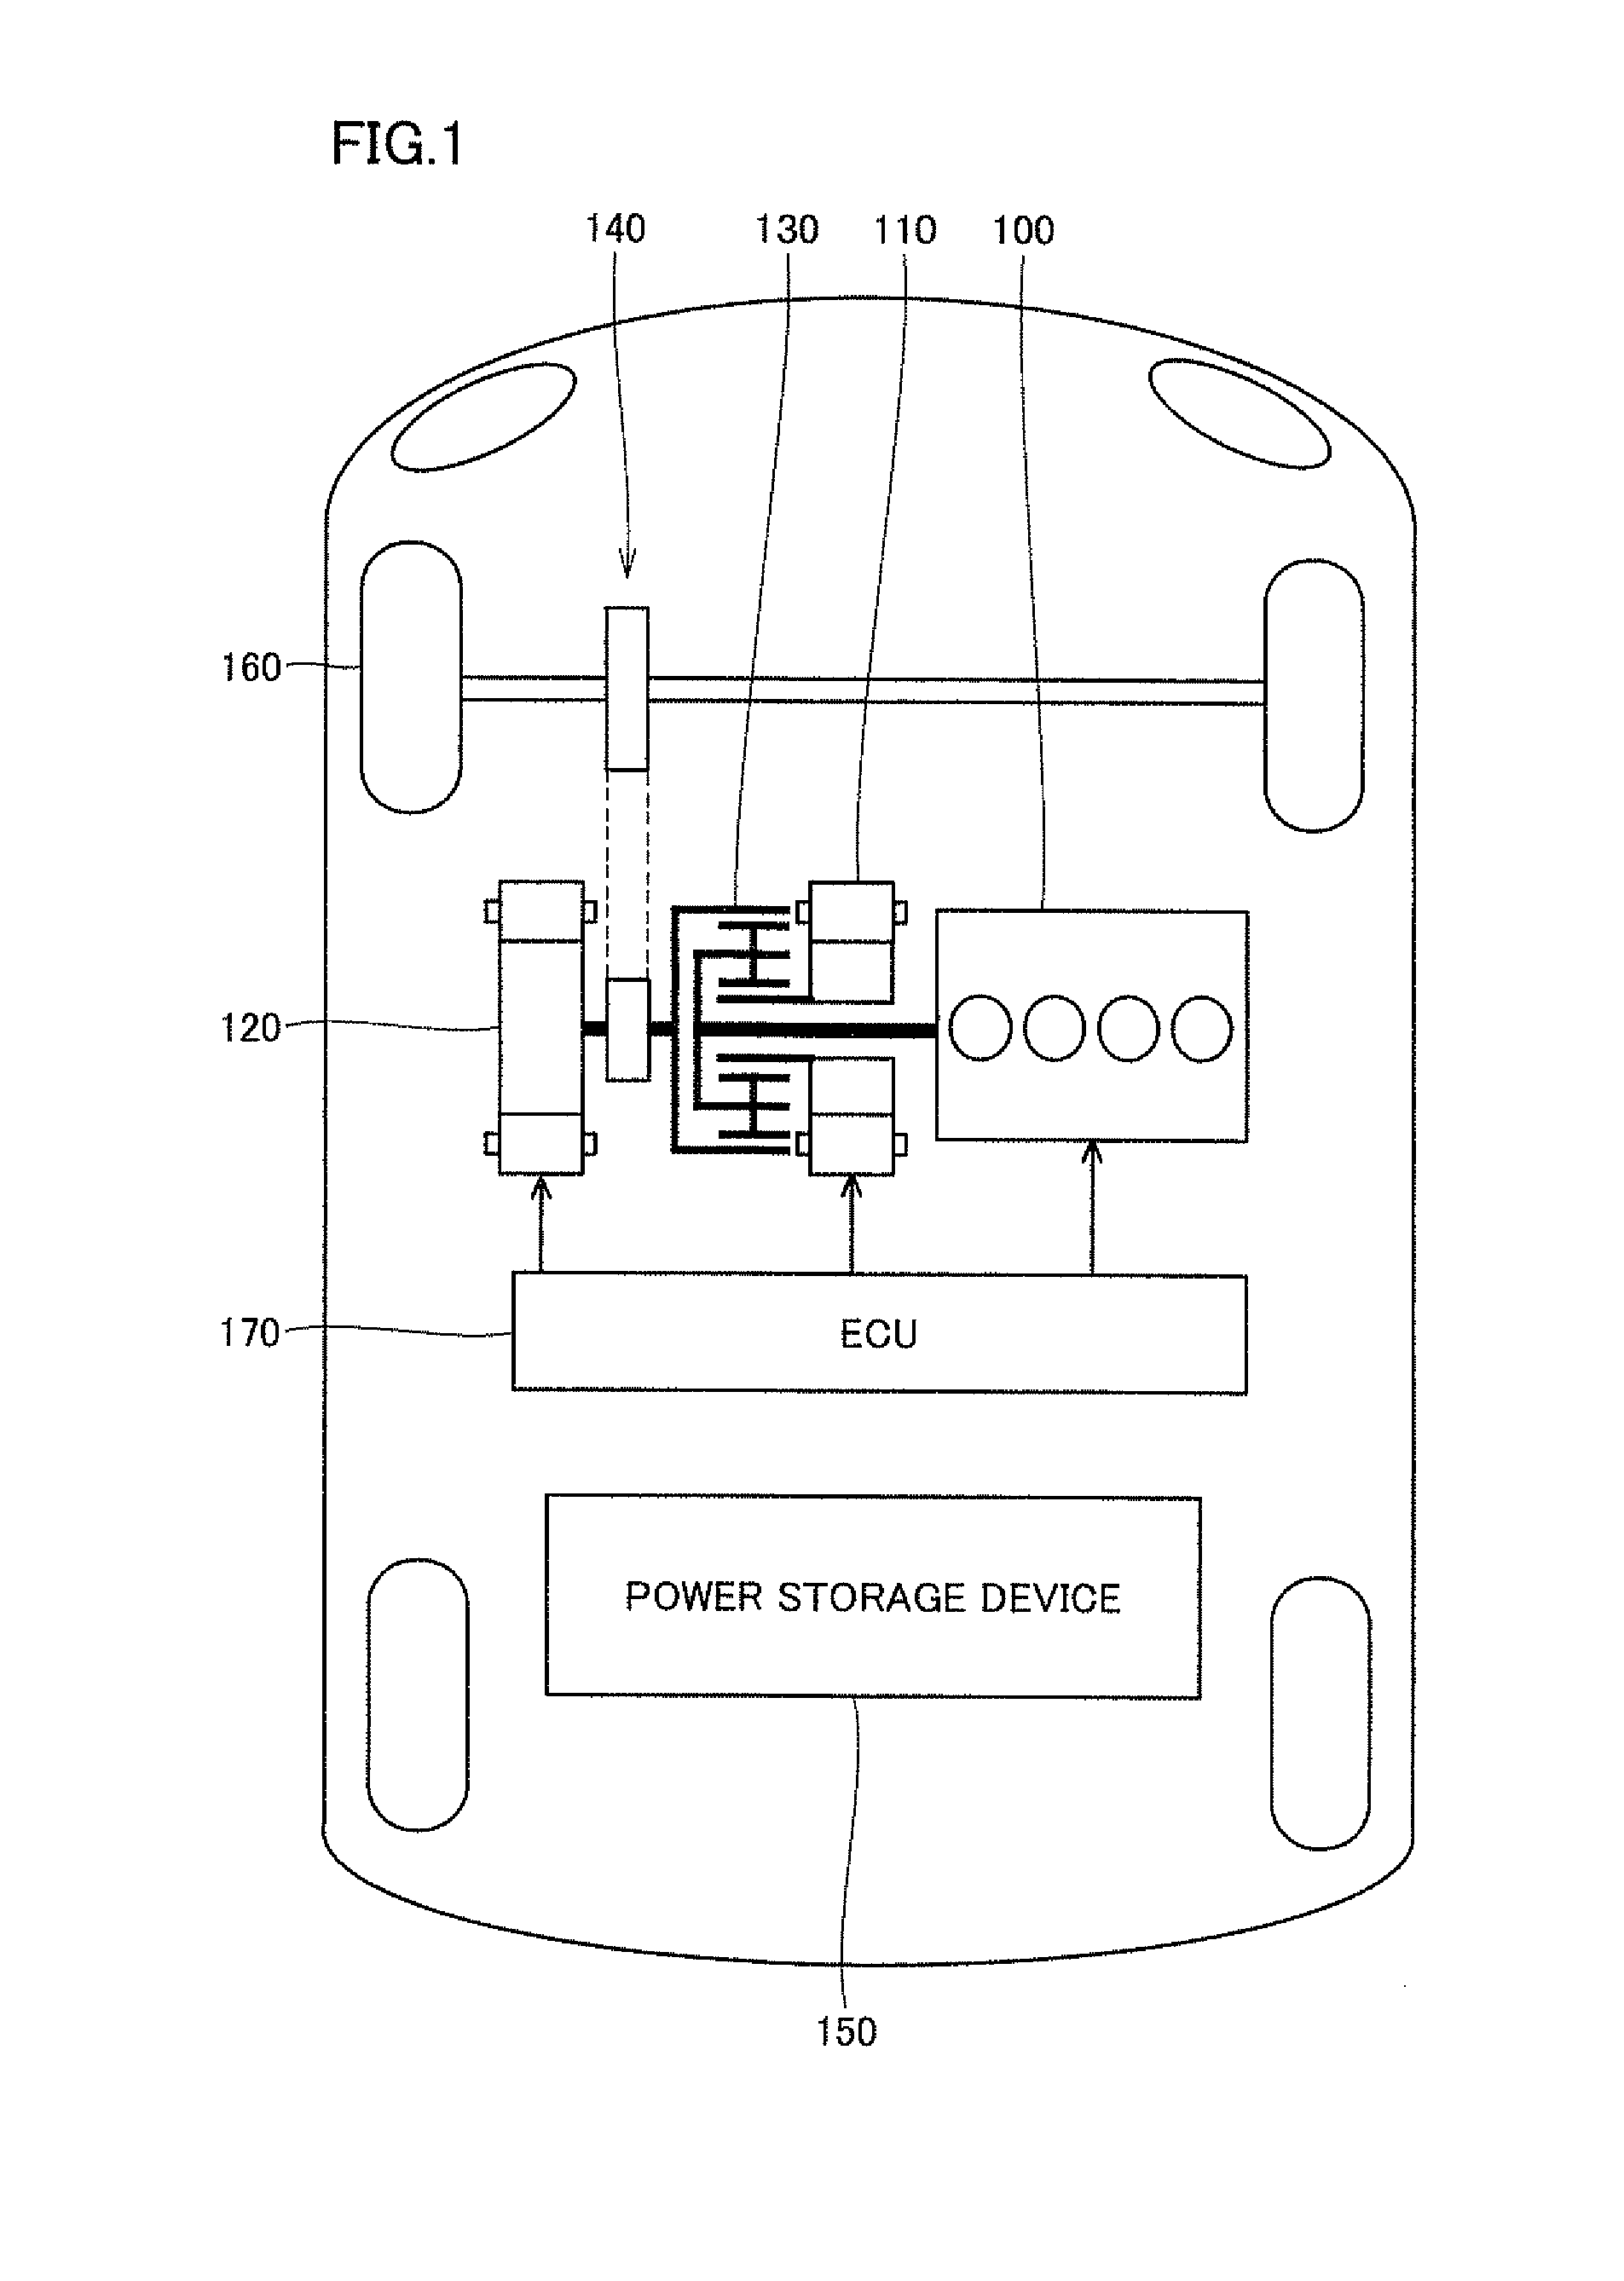 Charging control apparatus for vehicle